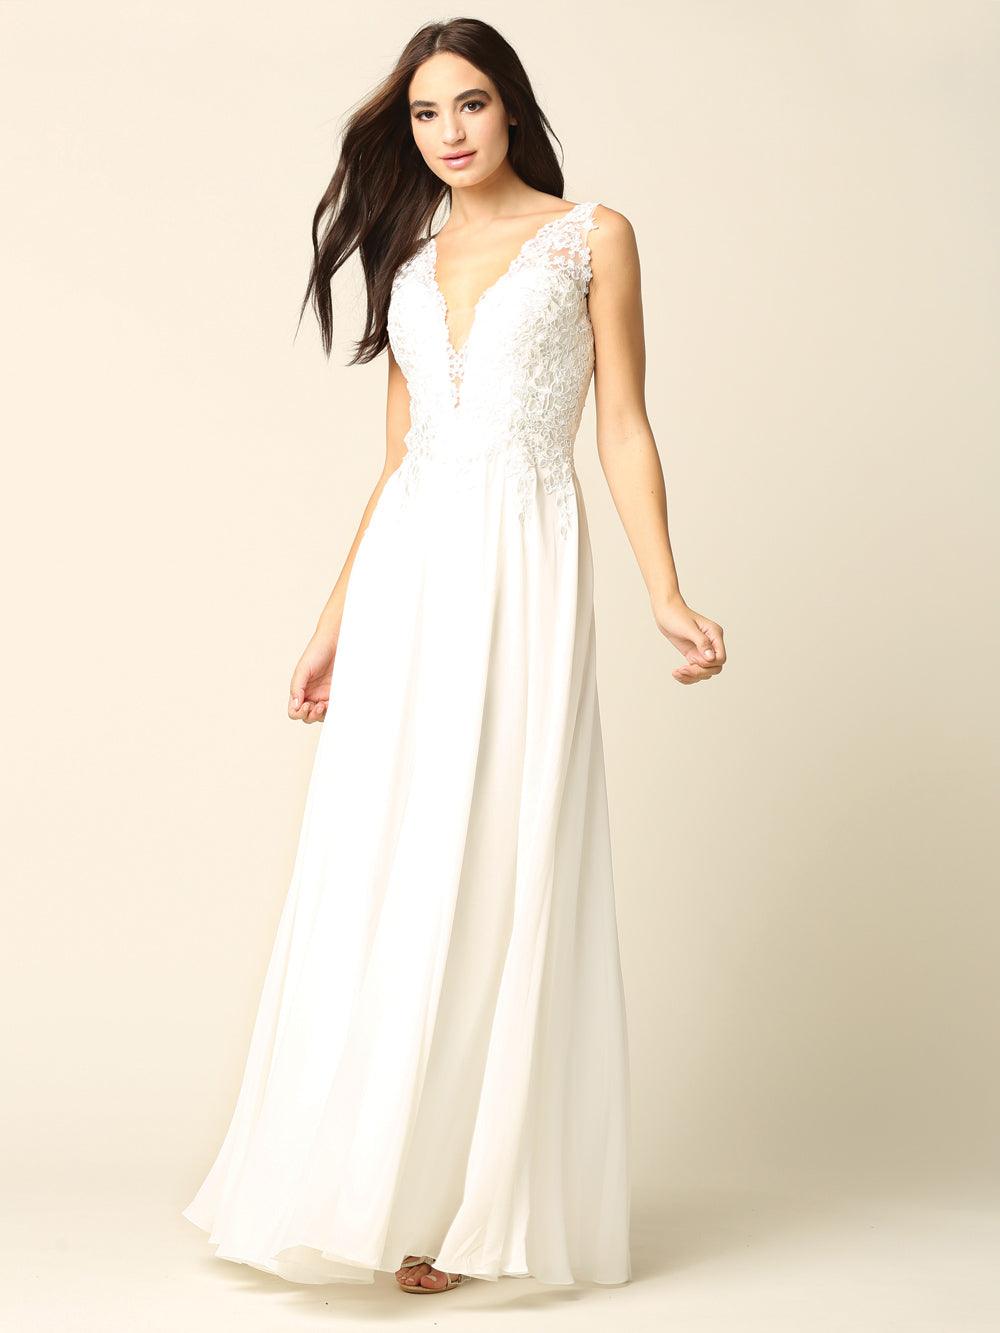 Long Sleeveless Lace Chiffon Wedding Gown - The Dress Outlet